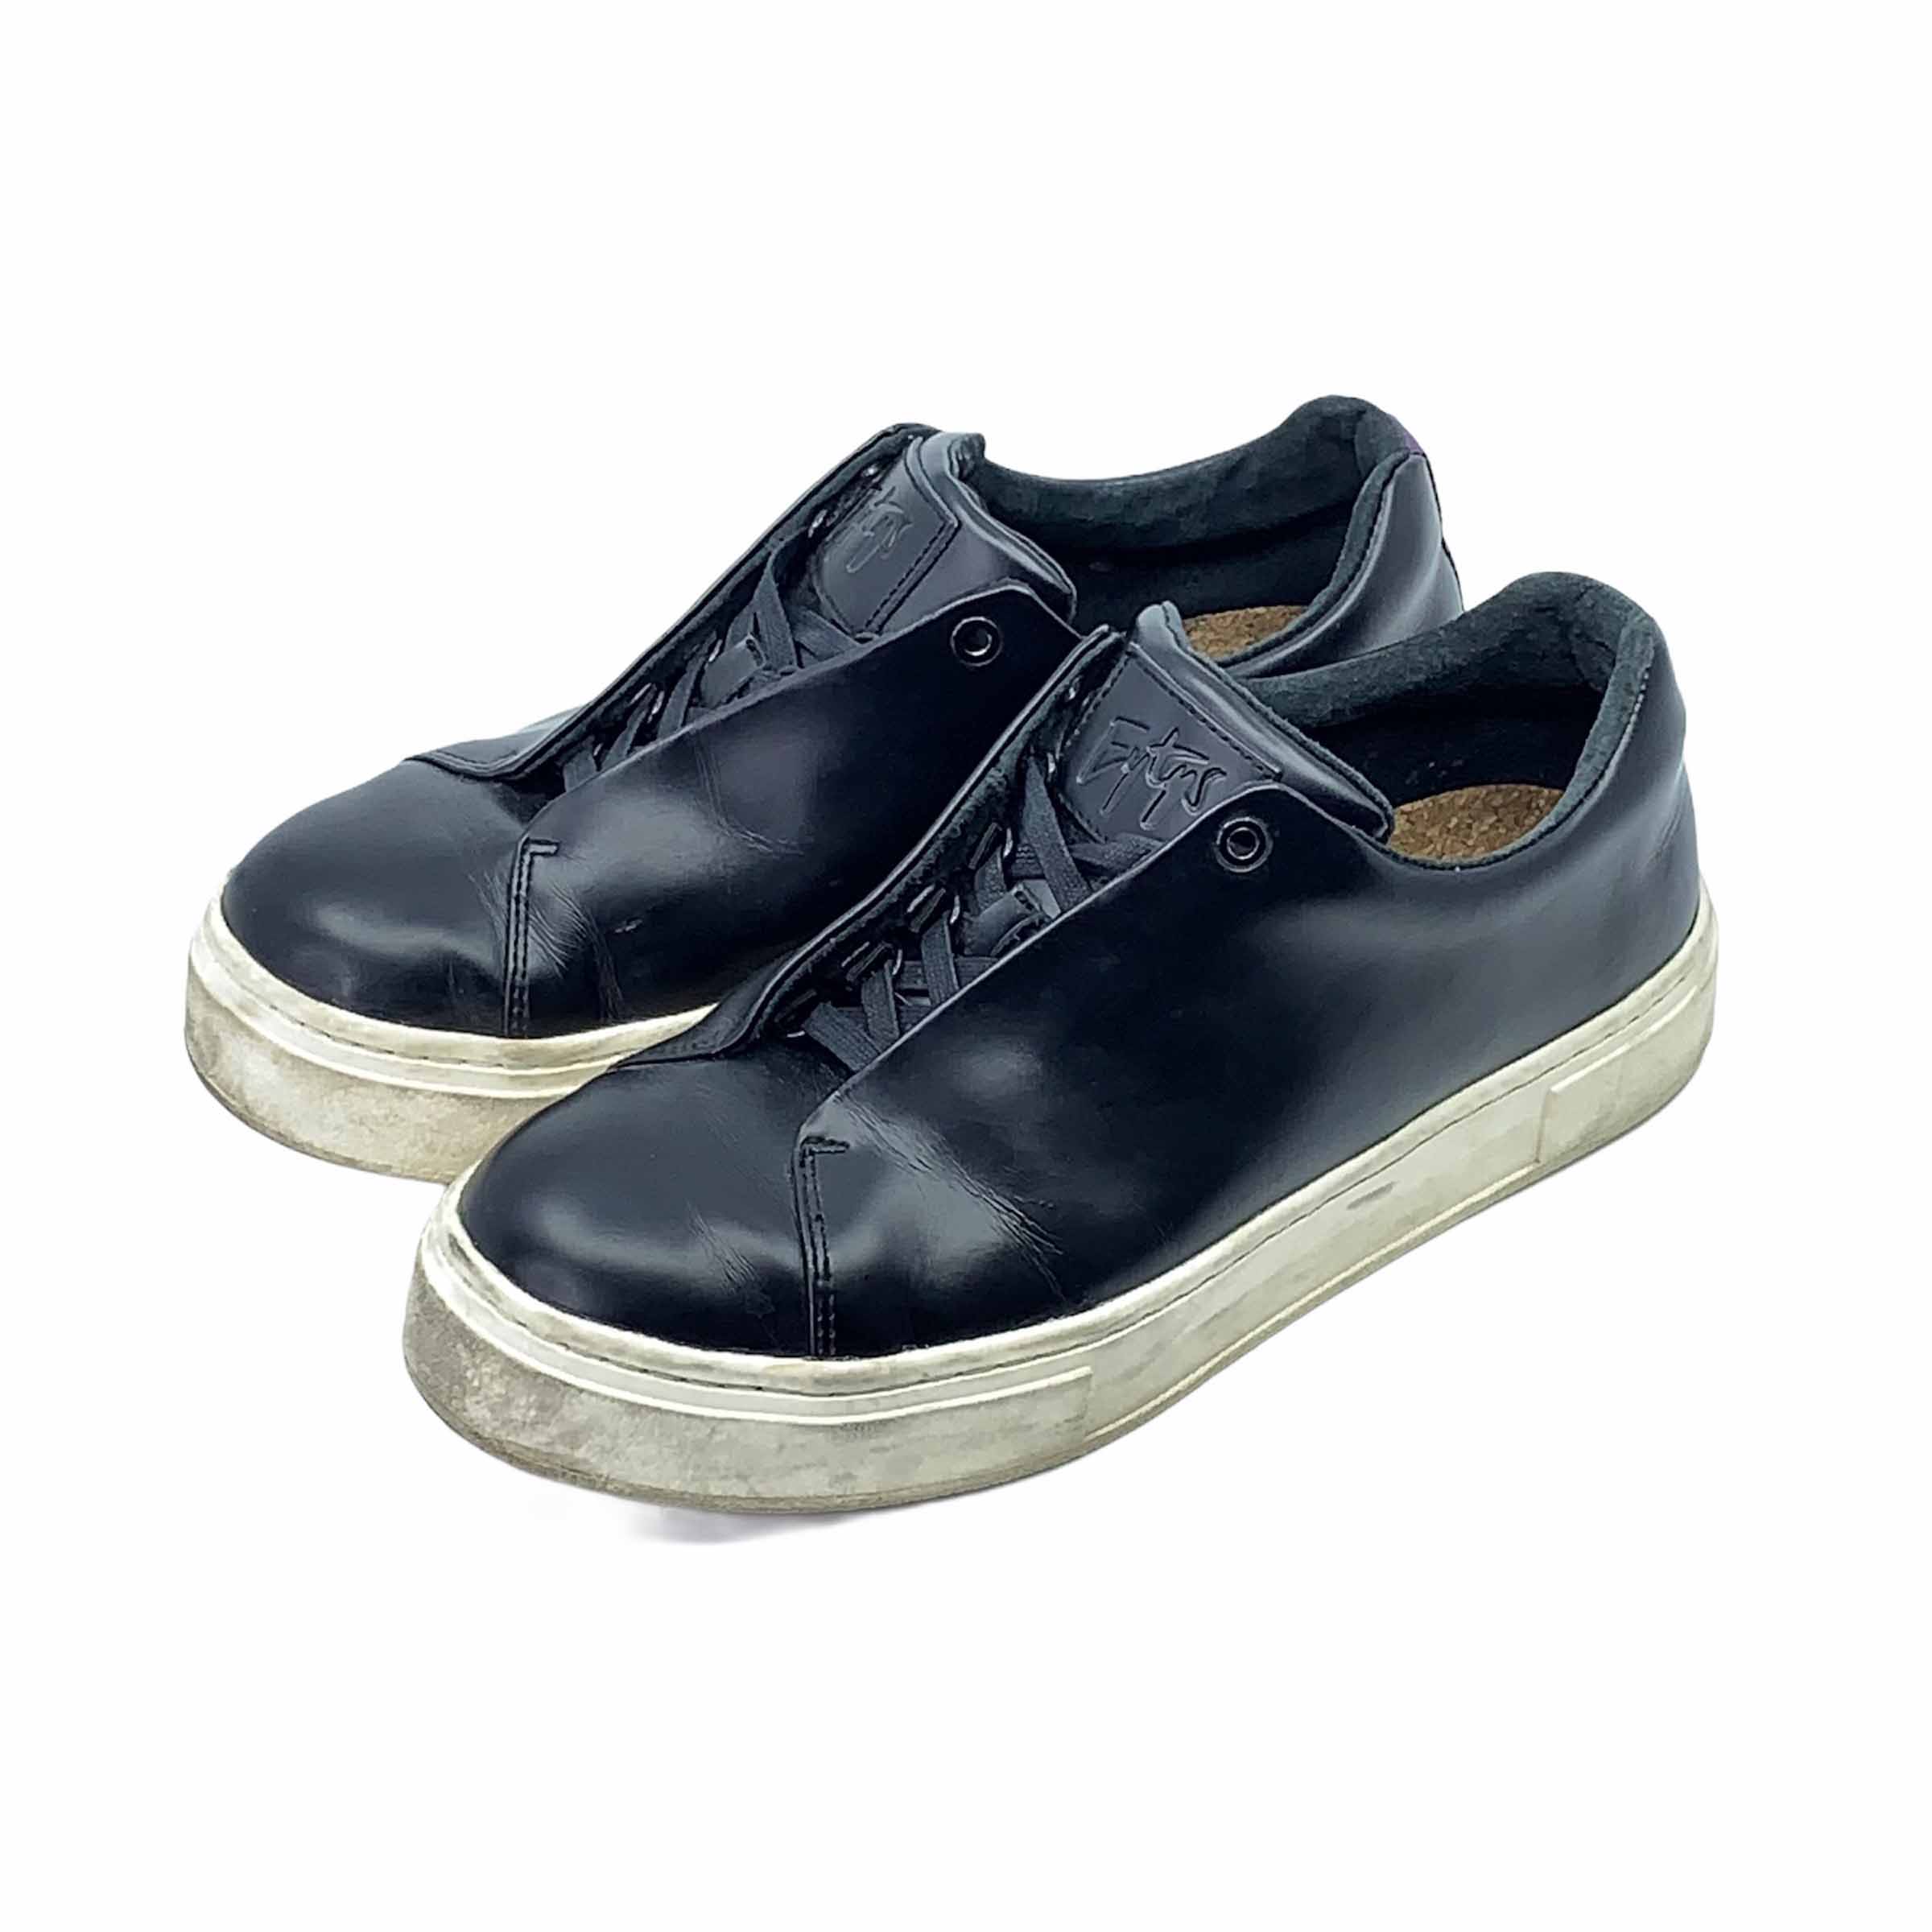 [EYTYS] Leather Sneakers BK - Size US9